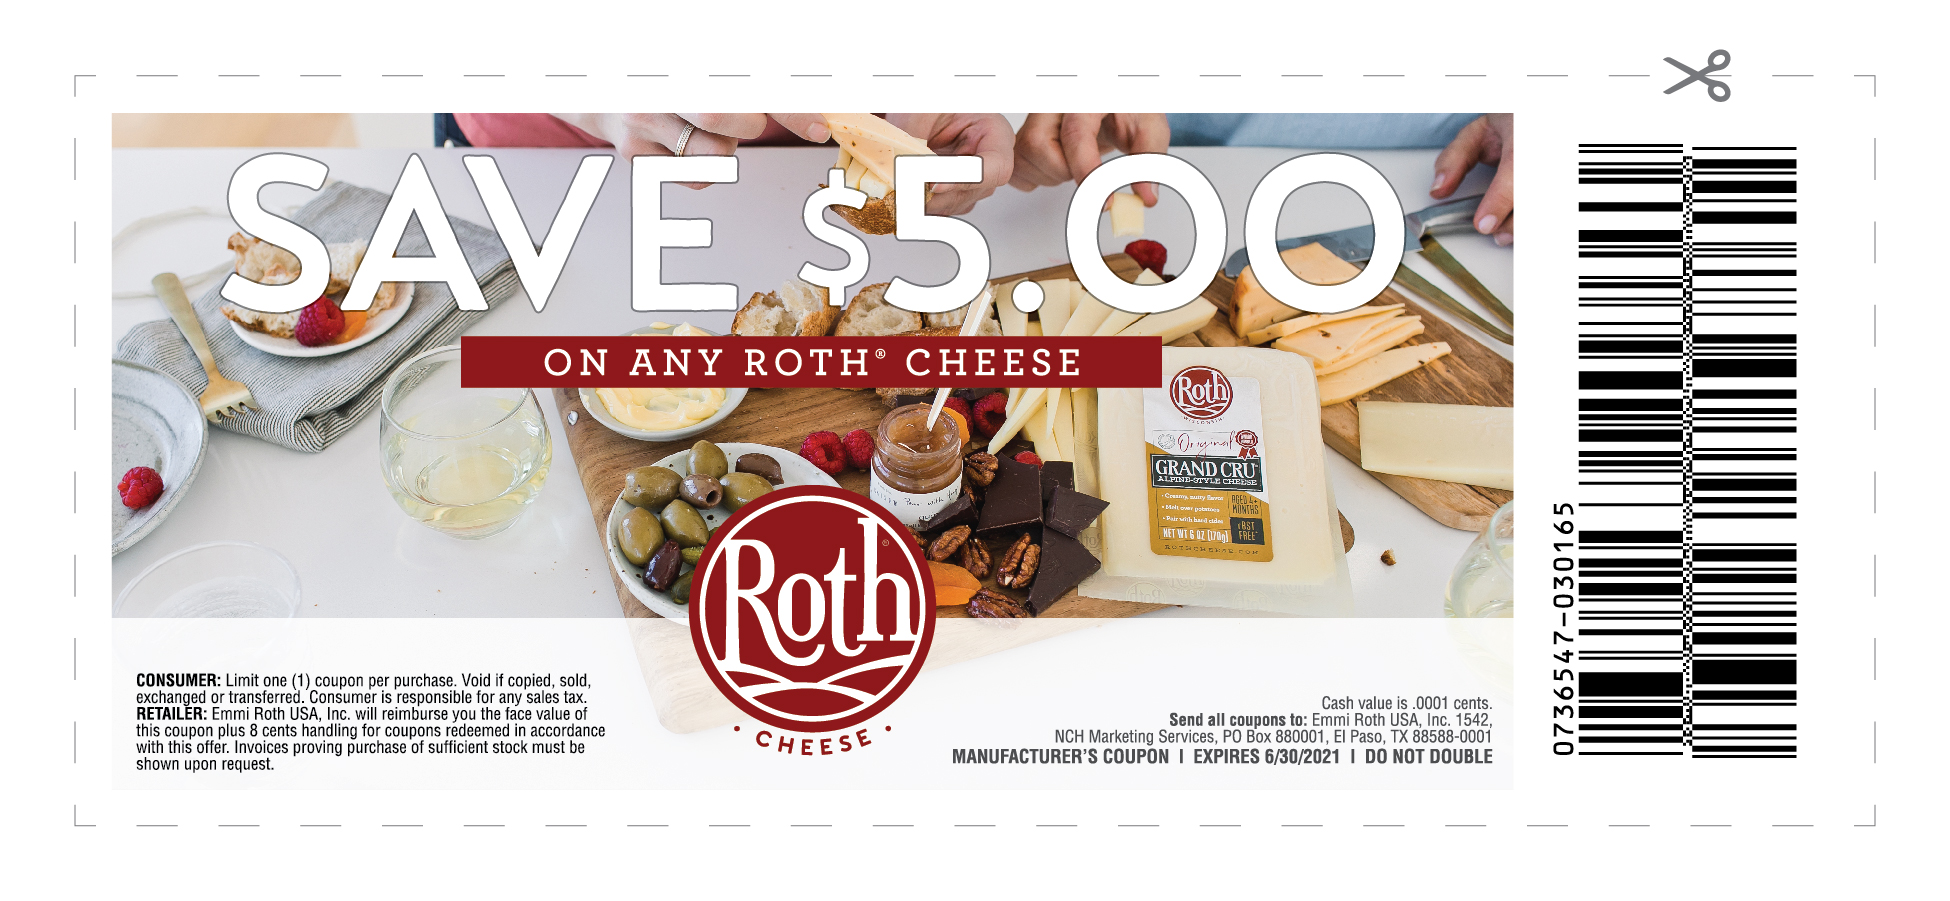 Roth Cheese Coupons Roth Cheese